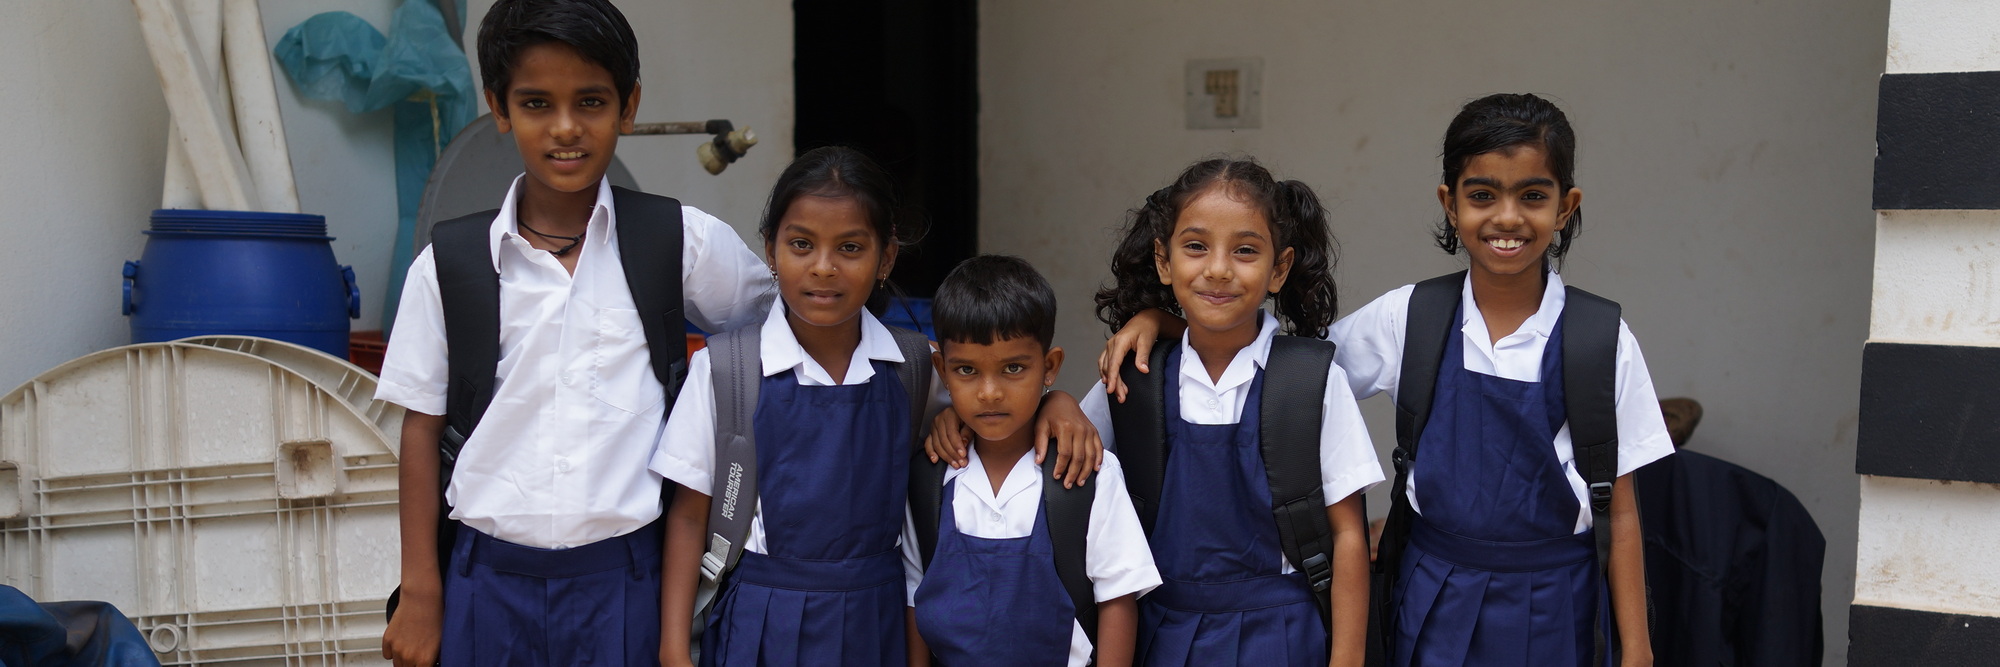 Education Banner Image for Goa Outreach